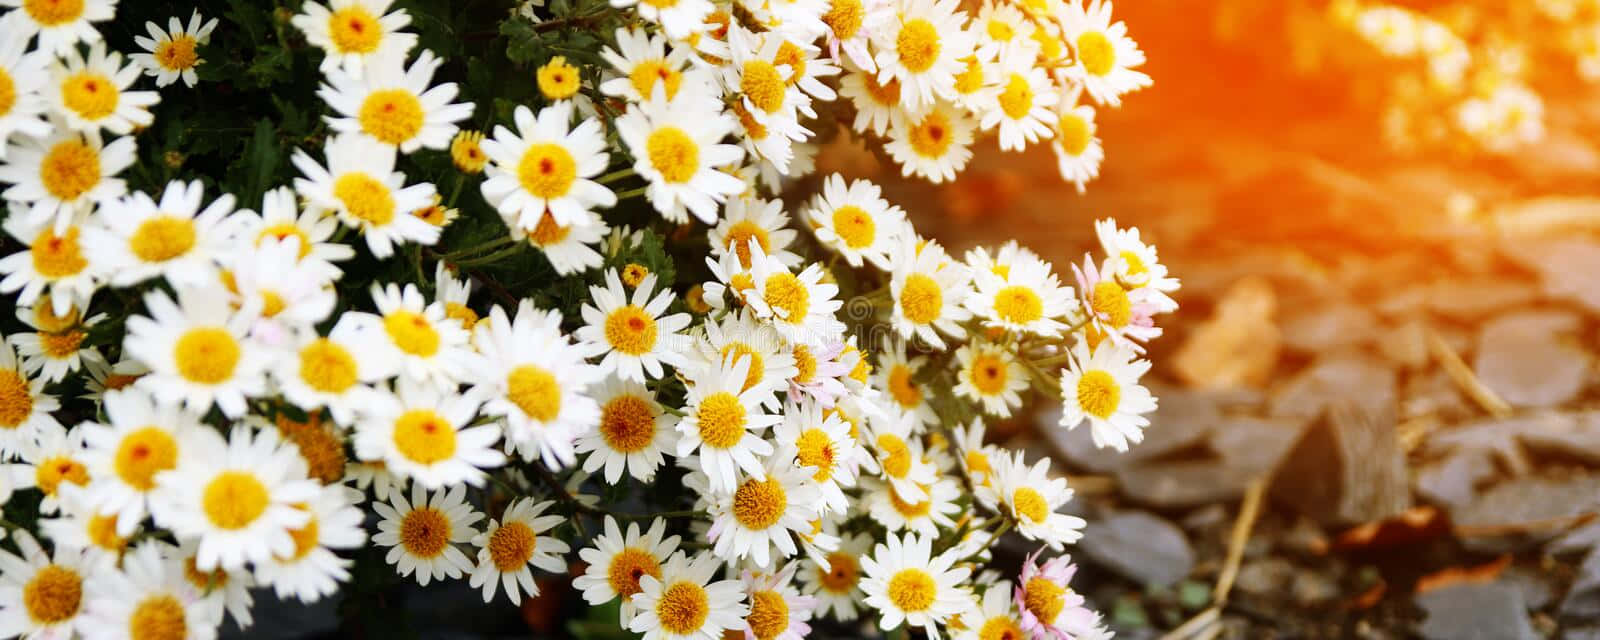 Sunlight And Daisy Aesthetic Computer Wallpaper